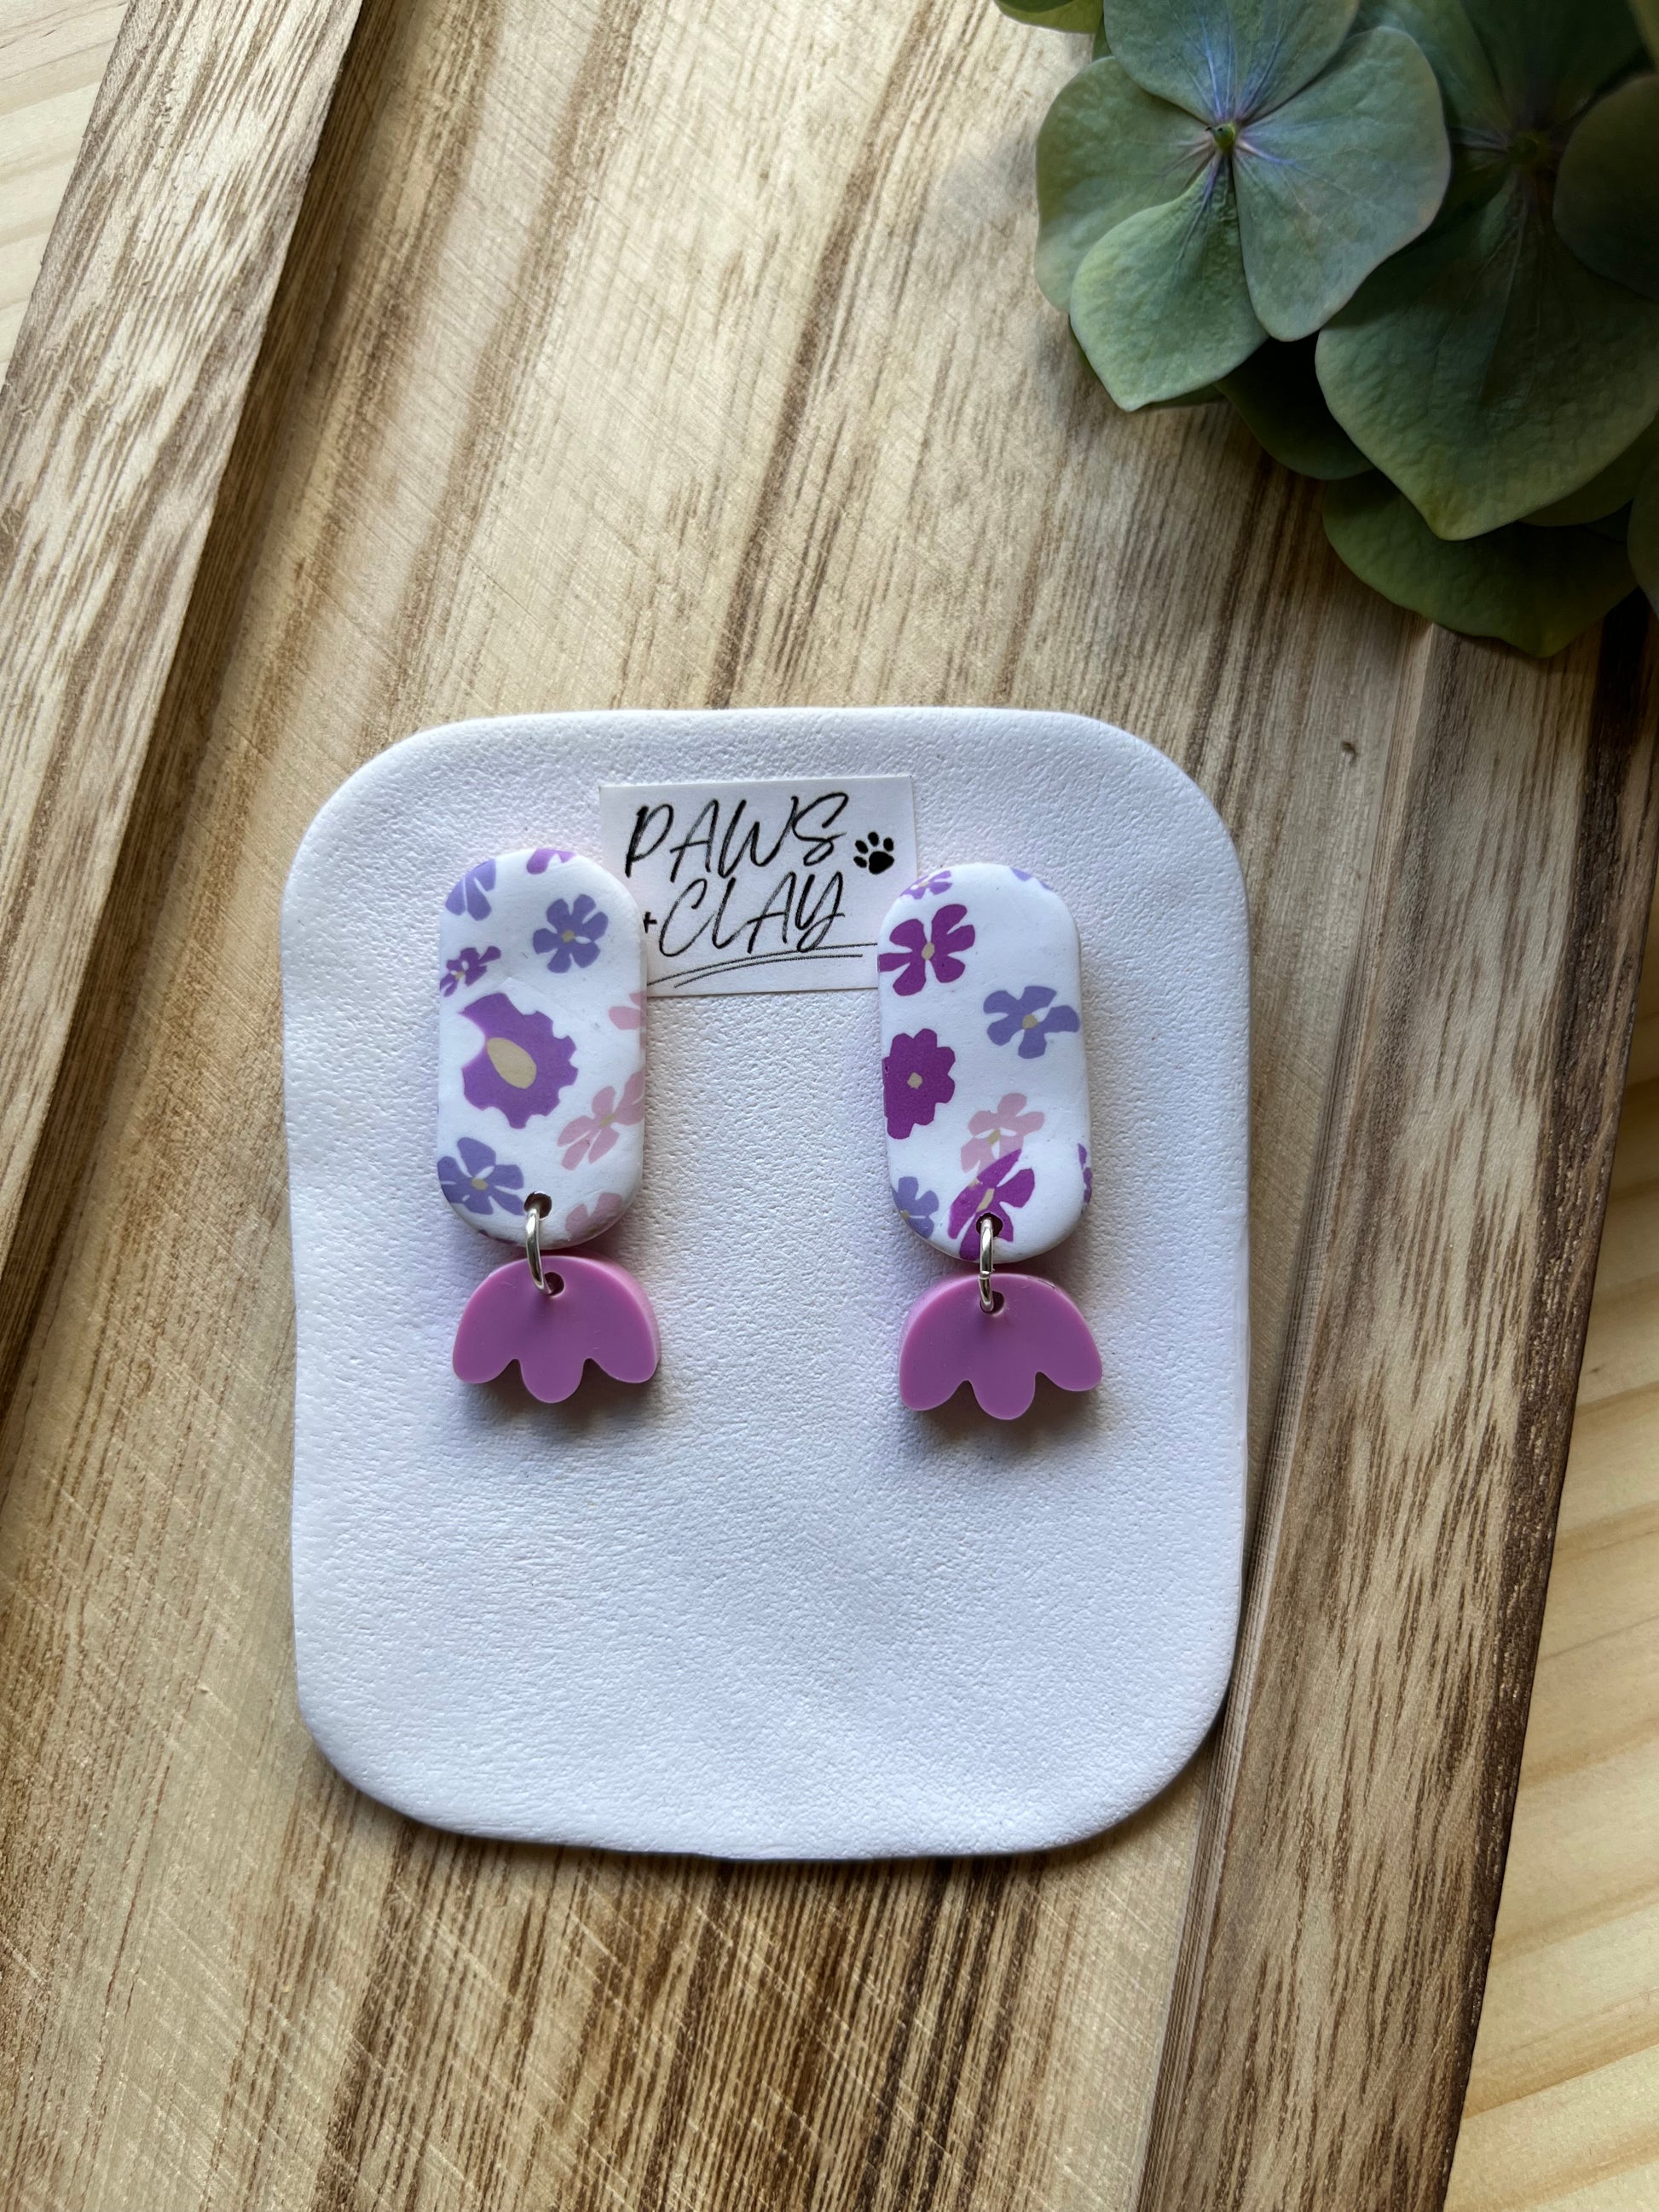 Oval purple and white floral polymer clay earrings